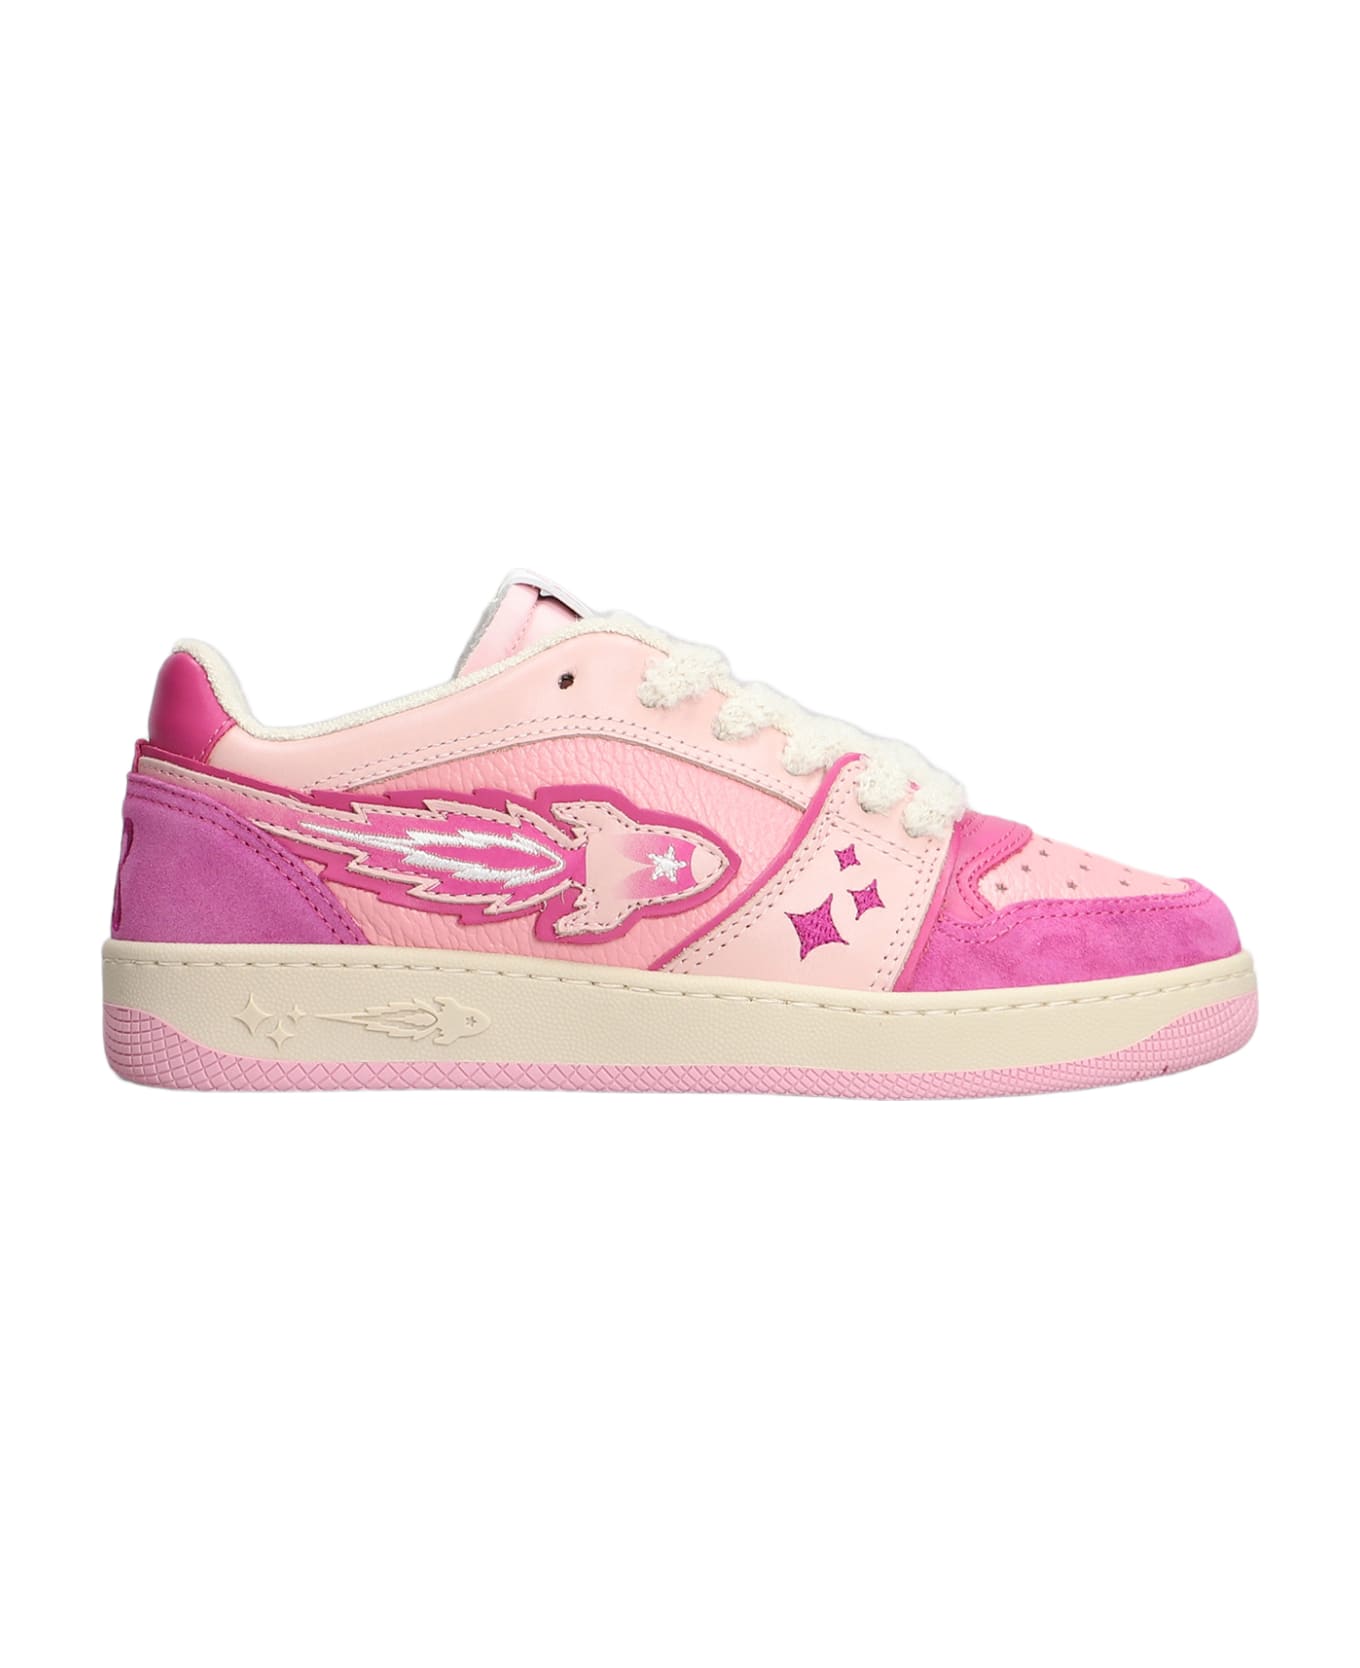 Enterprise Japan Sneakers In Rose-pink Suede And Leather - rose-pink